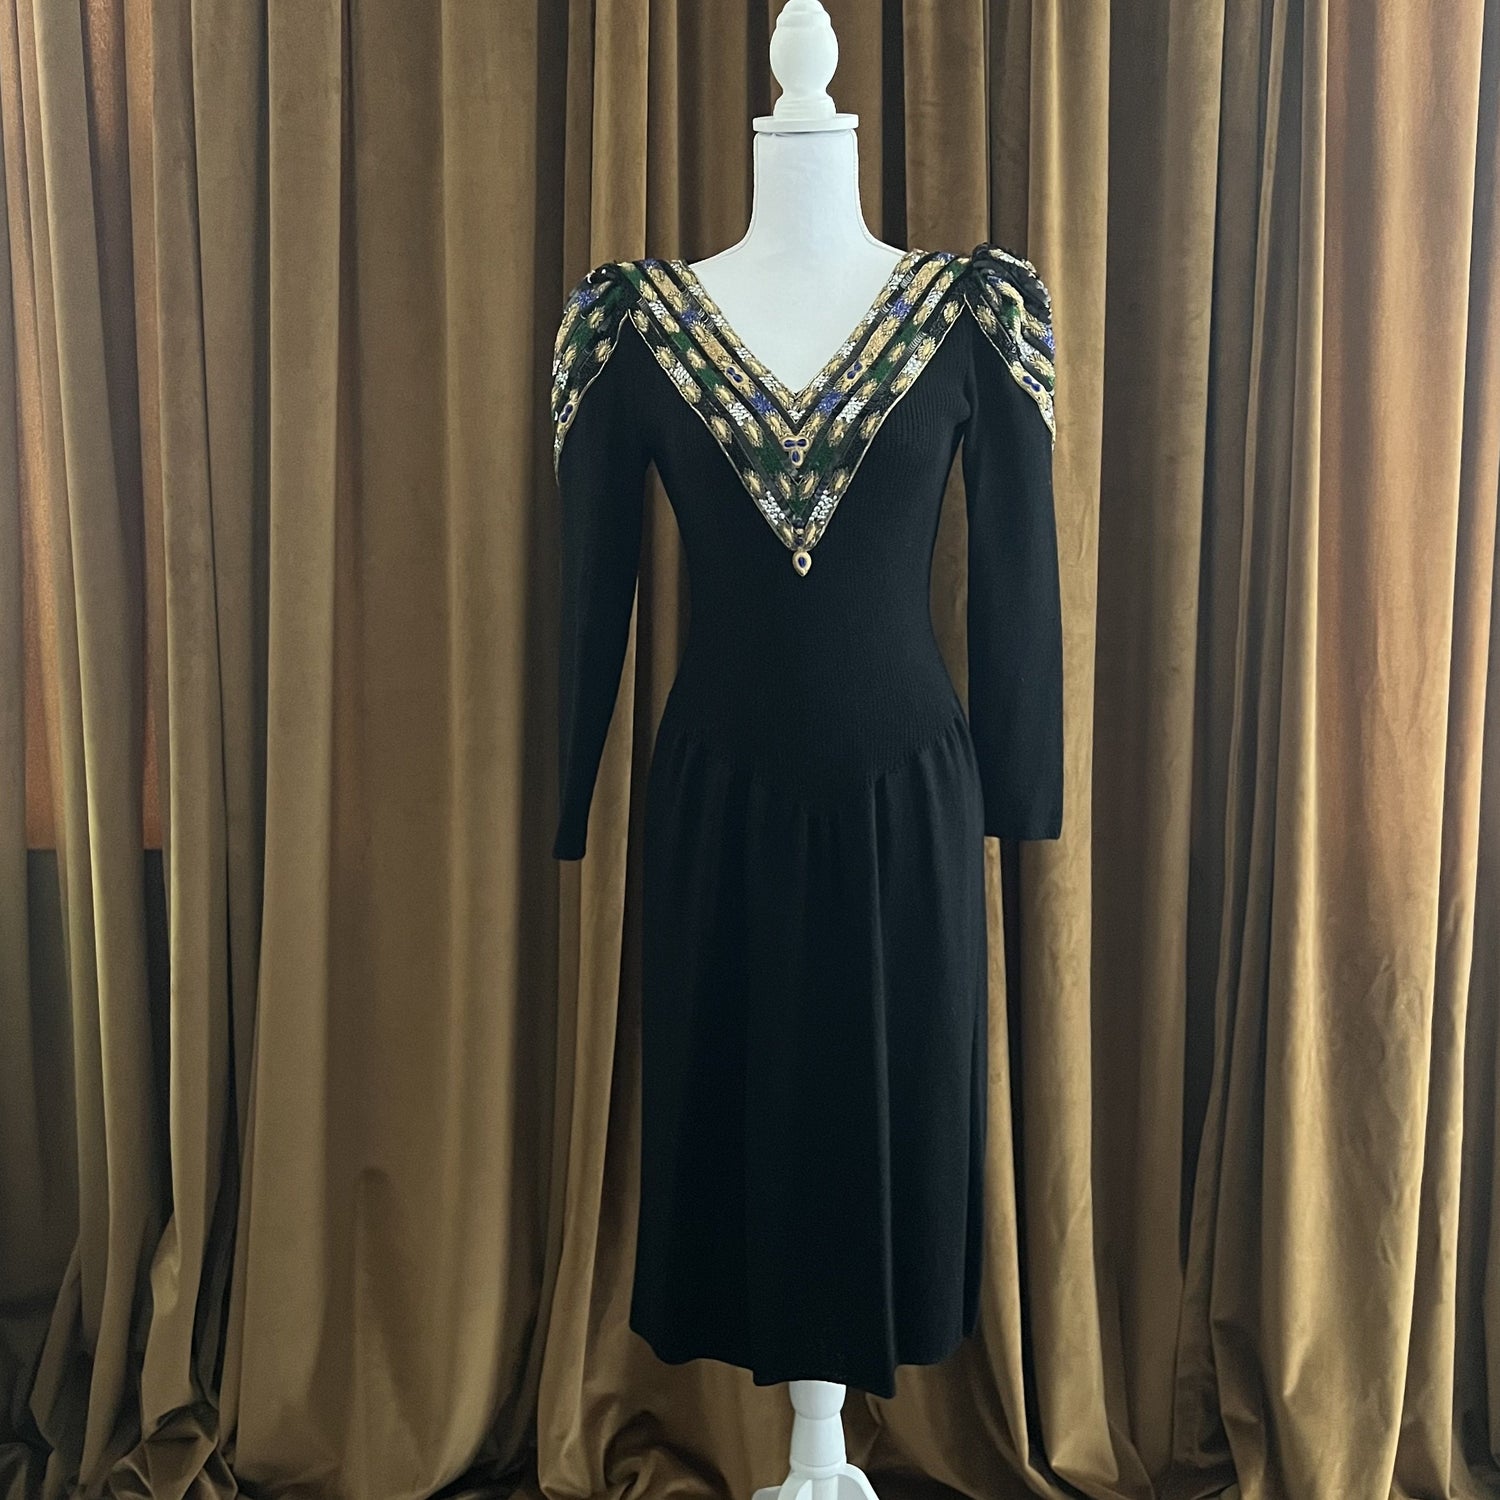 Black sweater dress with gold and blue sequins